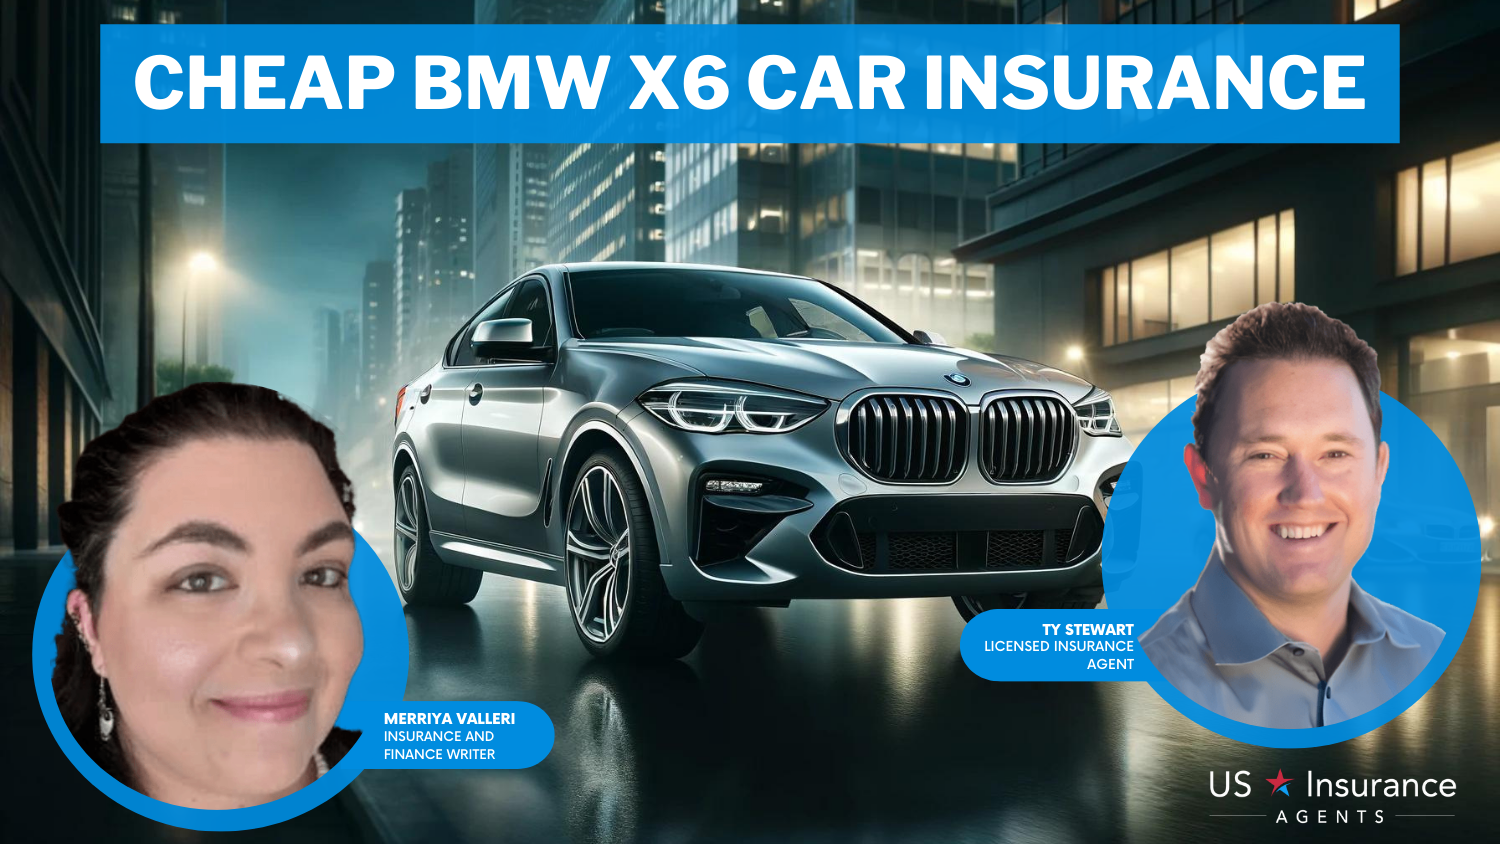 Cheap BMW X6 Car Insurance: Erie, State Farm, and Travelers